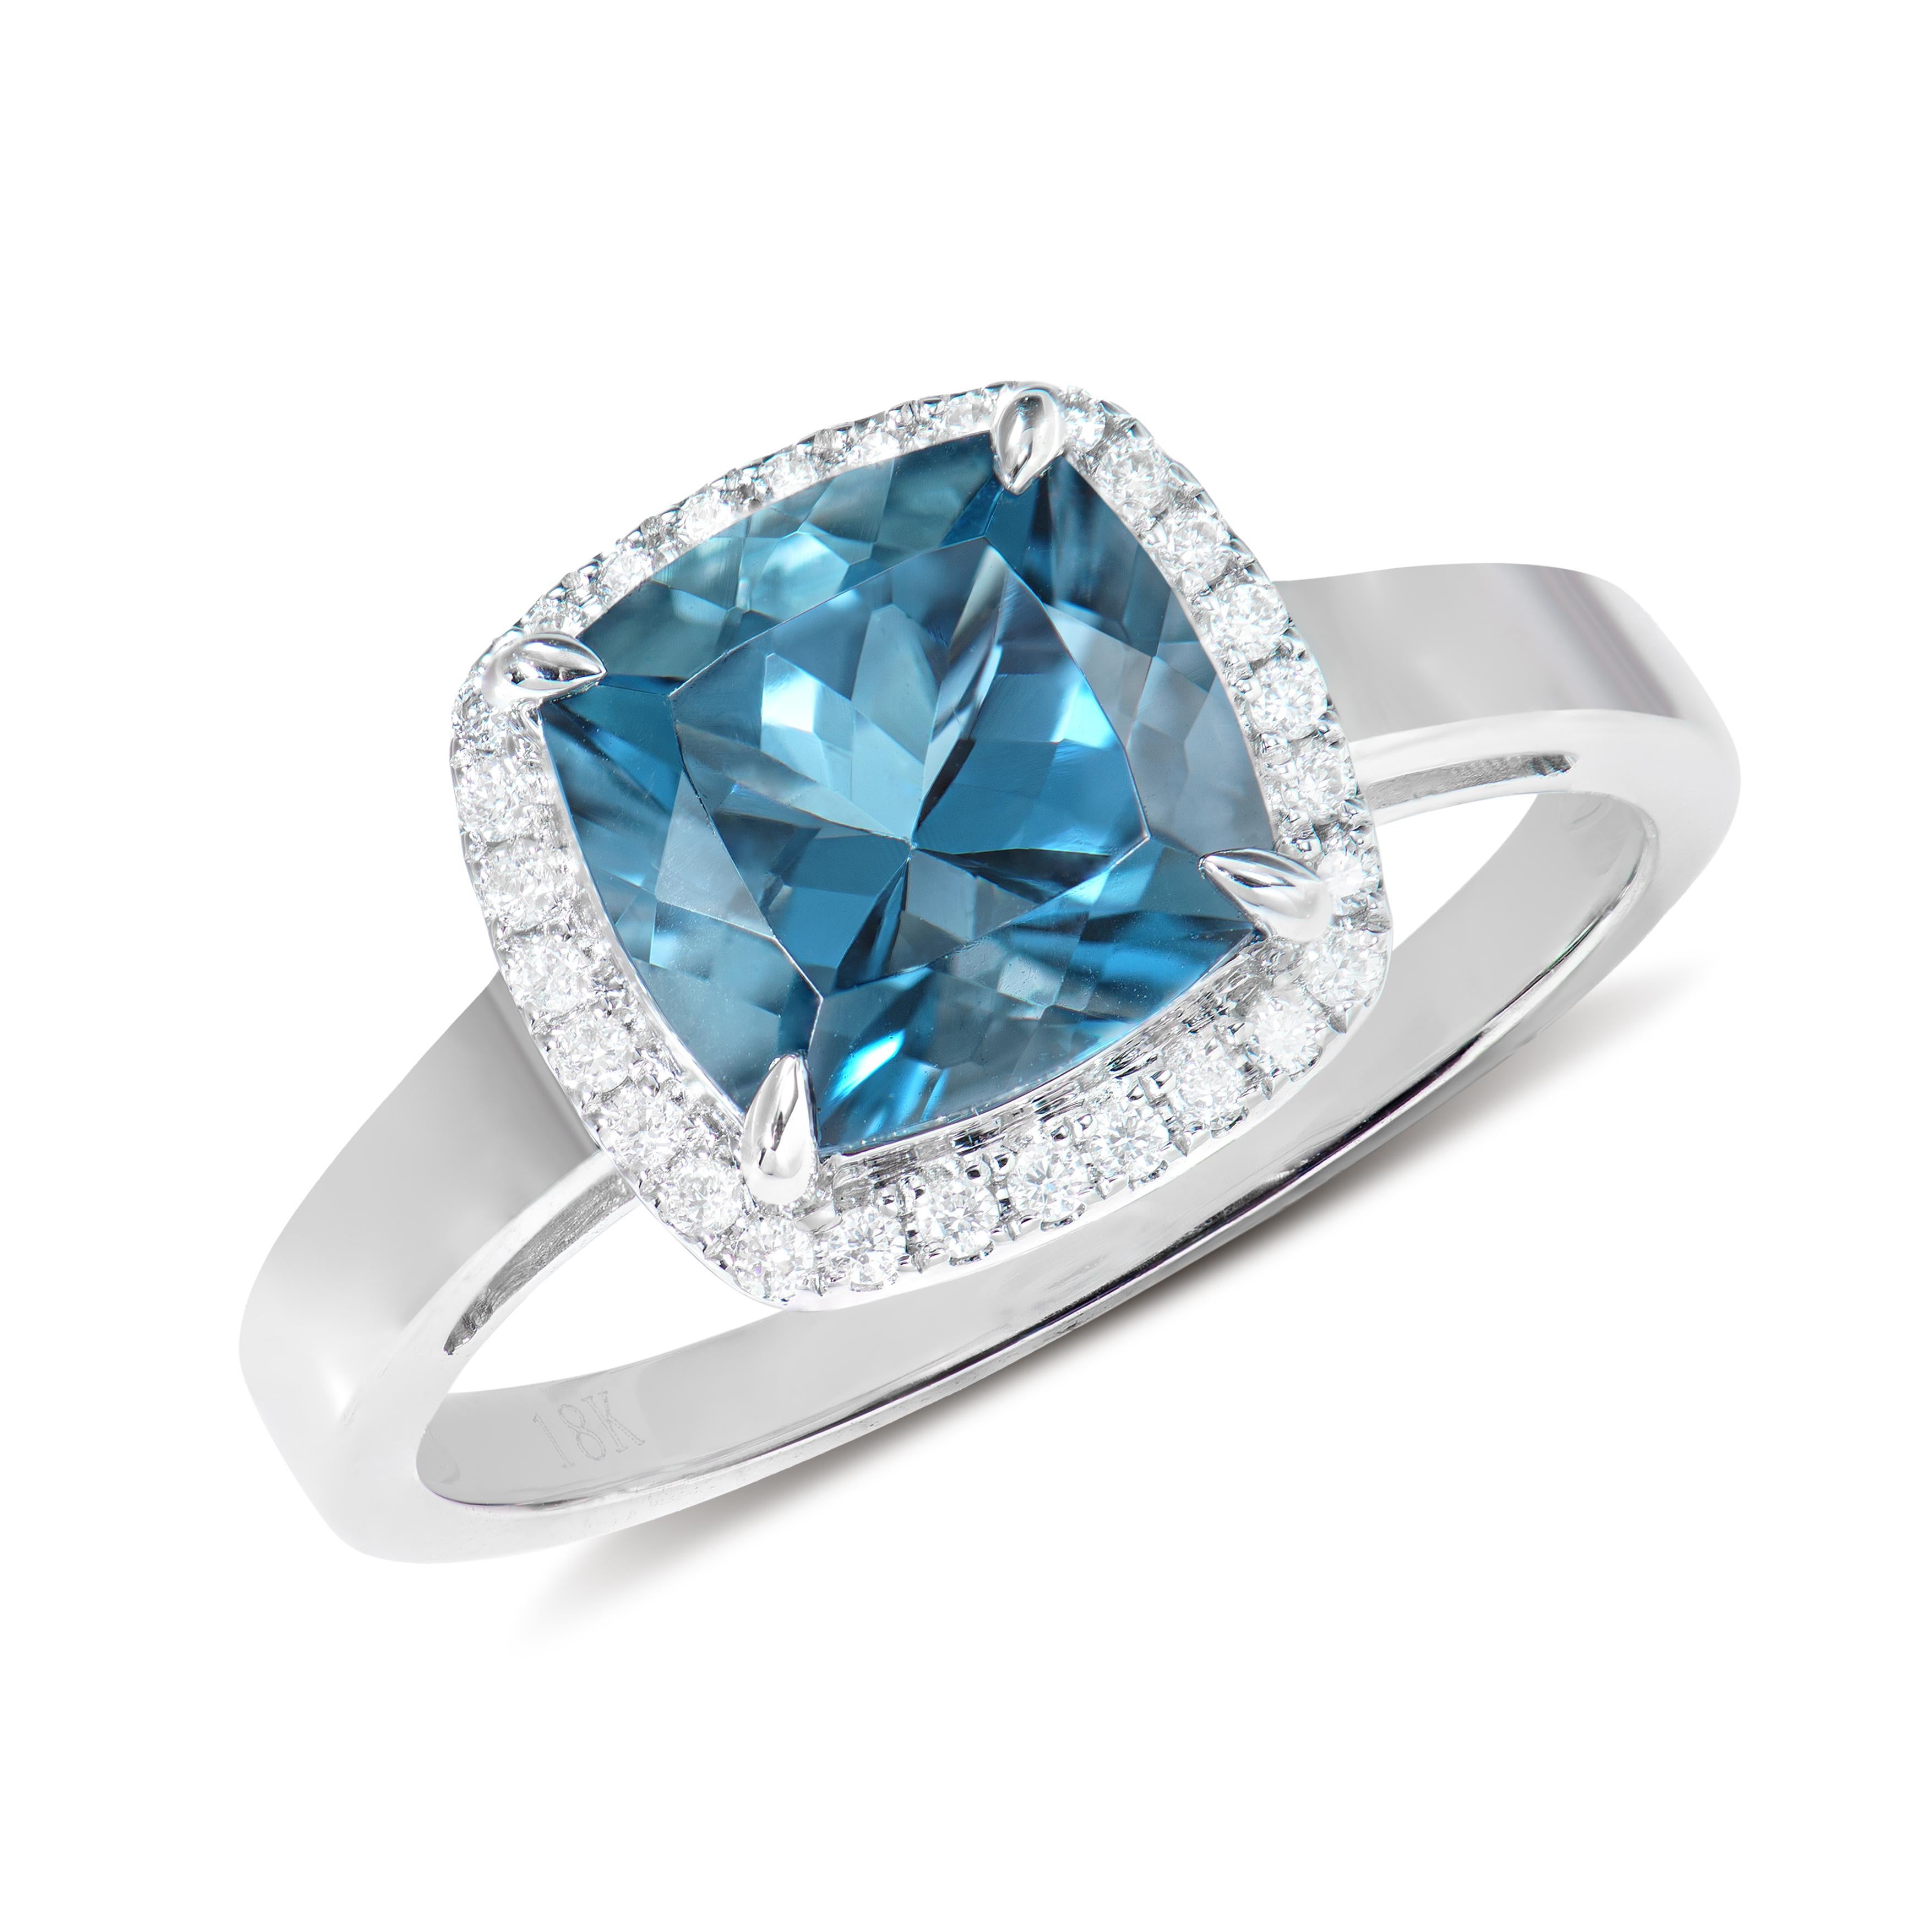 Presented A lovely collection of gems, including Amethyst, Peridot, Rhodolite, Sky Blue Topaz, Swiss Blue Topaz, London Blue Topaz and Morganite is perfect for people who value quality and want to wear it to any occasion or celebration.  The white